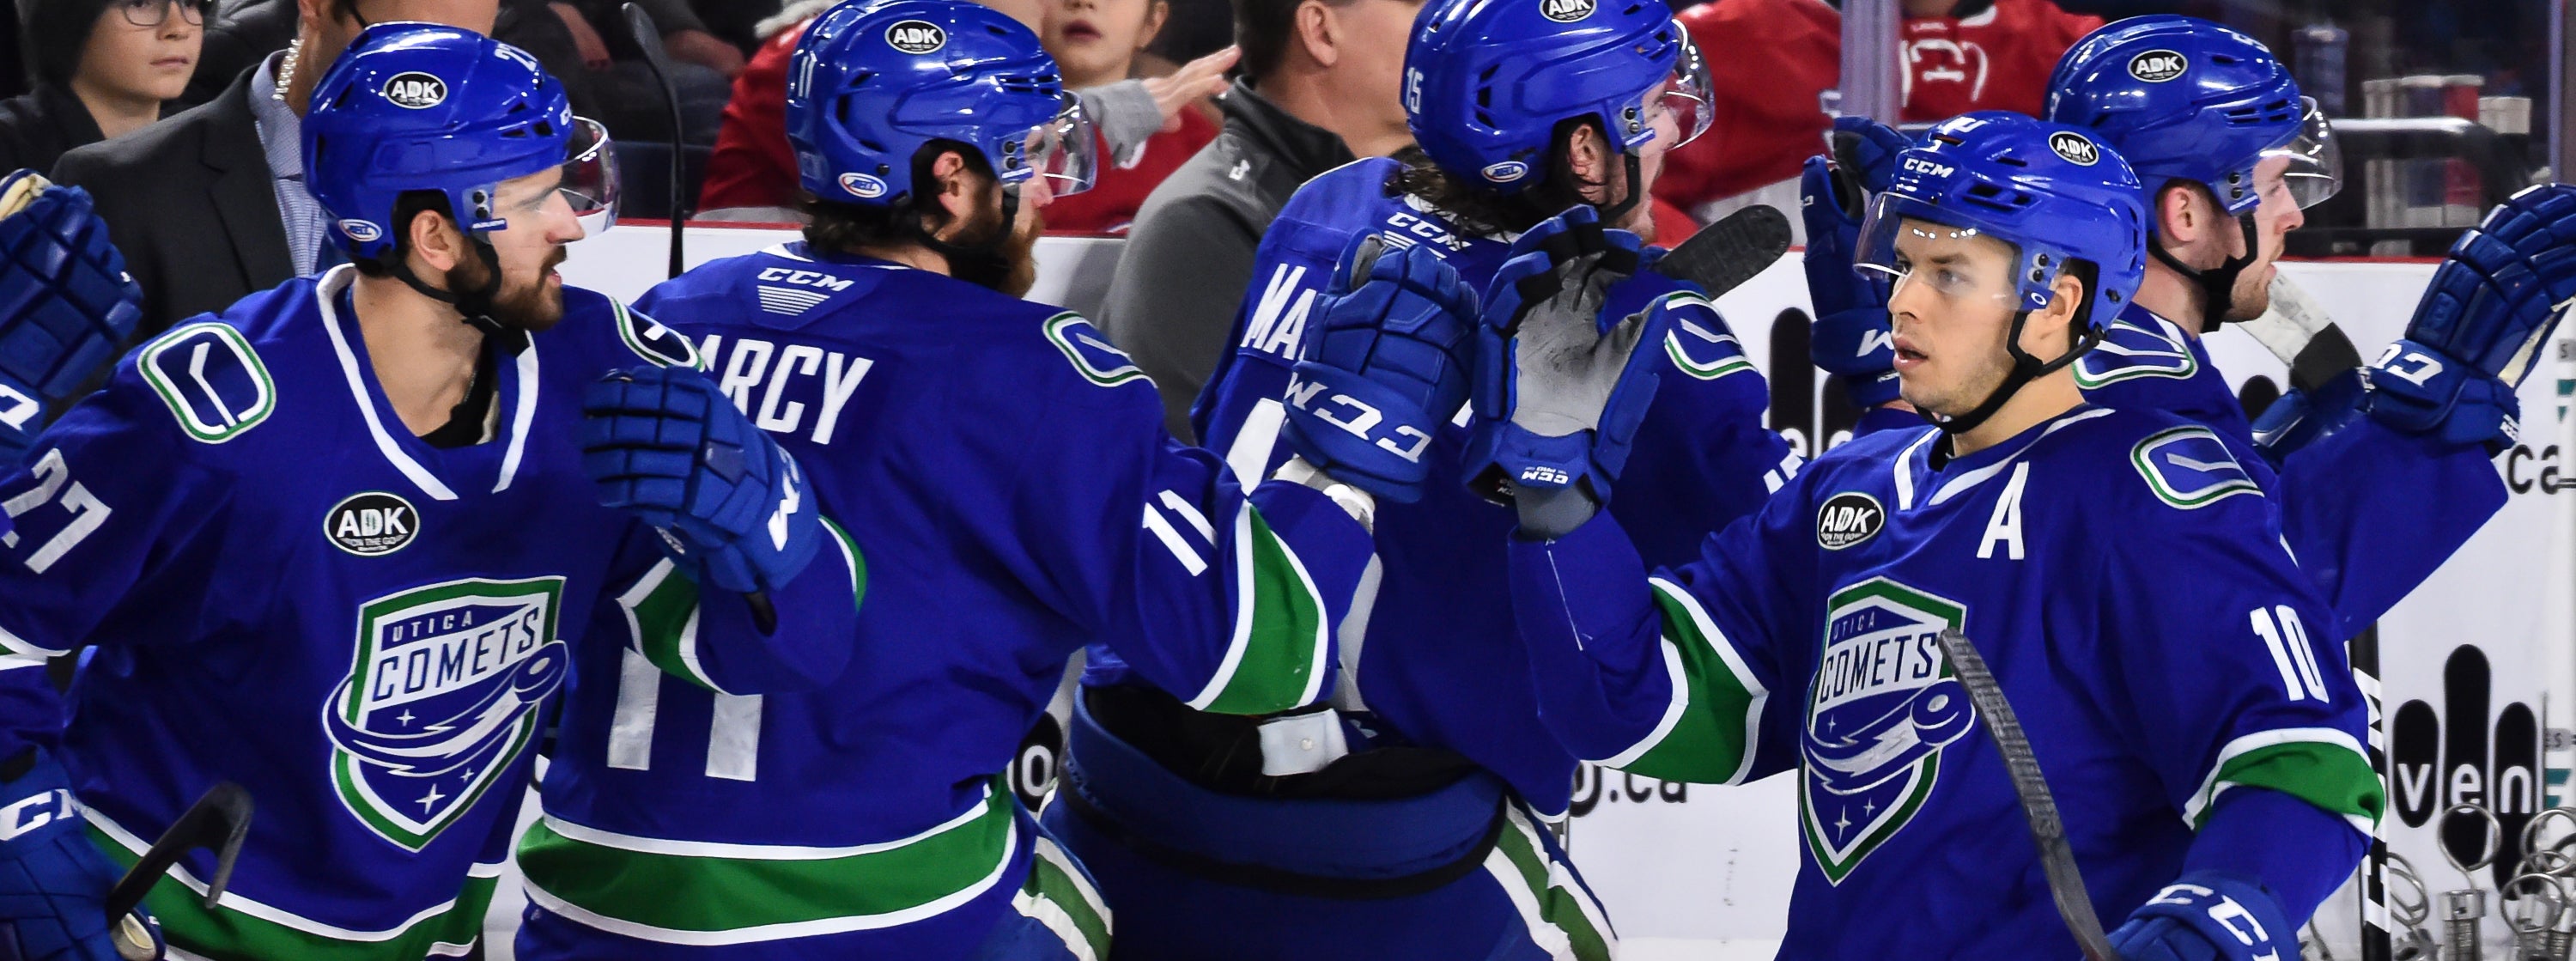 POWER PLAY LIFTS COMETS OVER ROCKET